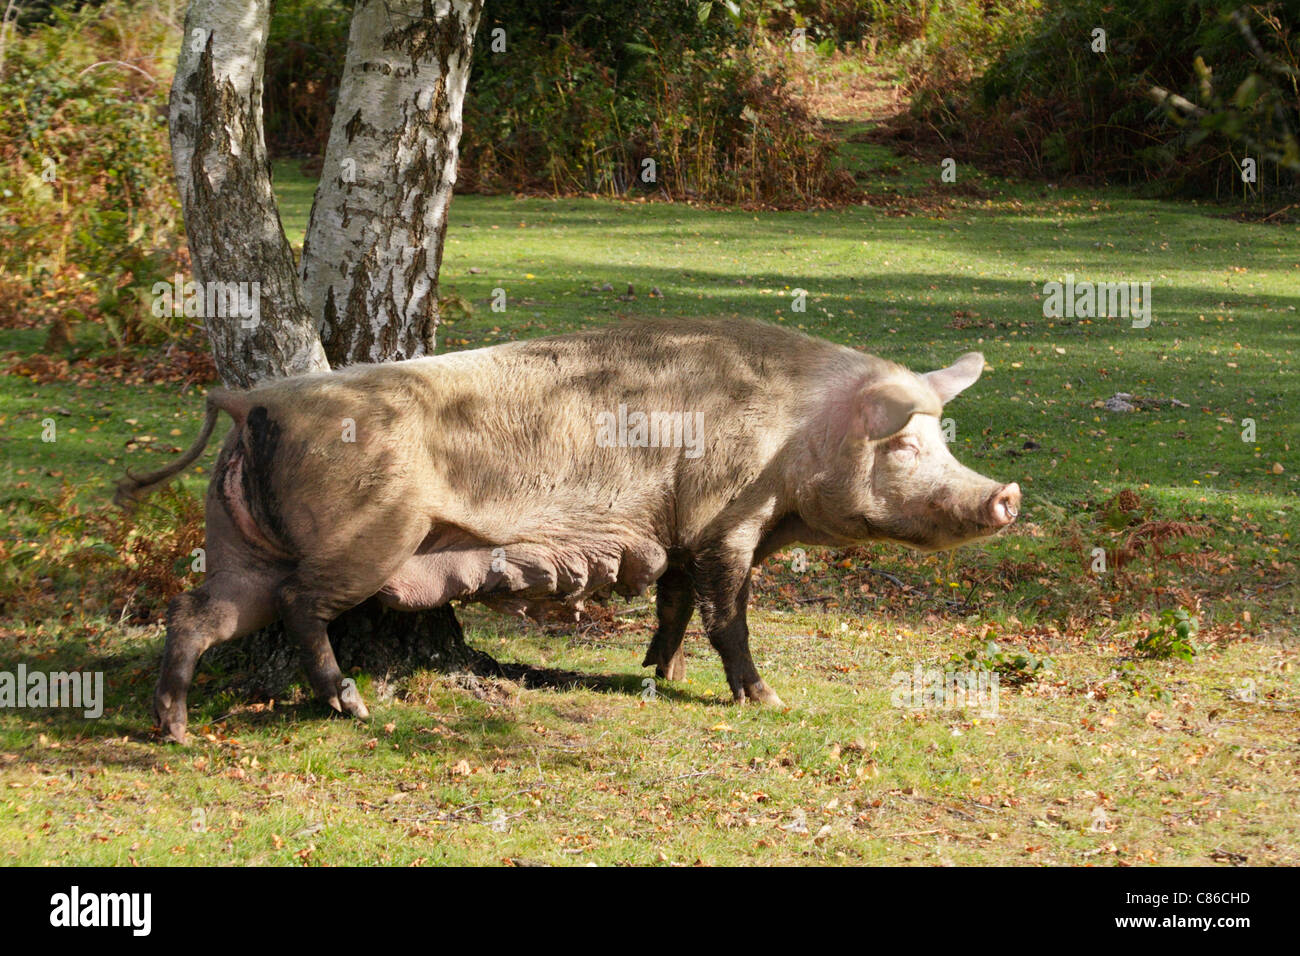 Breeding sow roaming free and foraging for acorns and fallen fruit during two months autumn pannage season in New Forest. Stock Photo